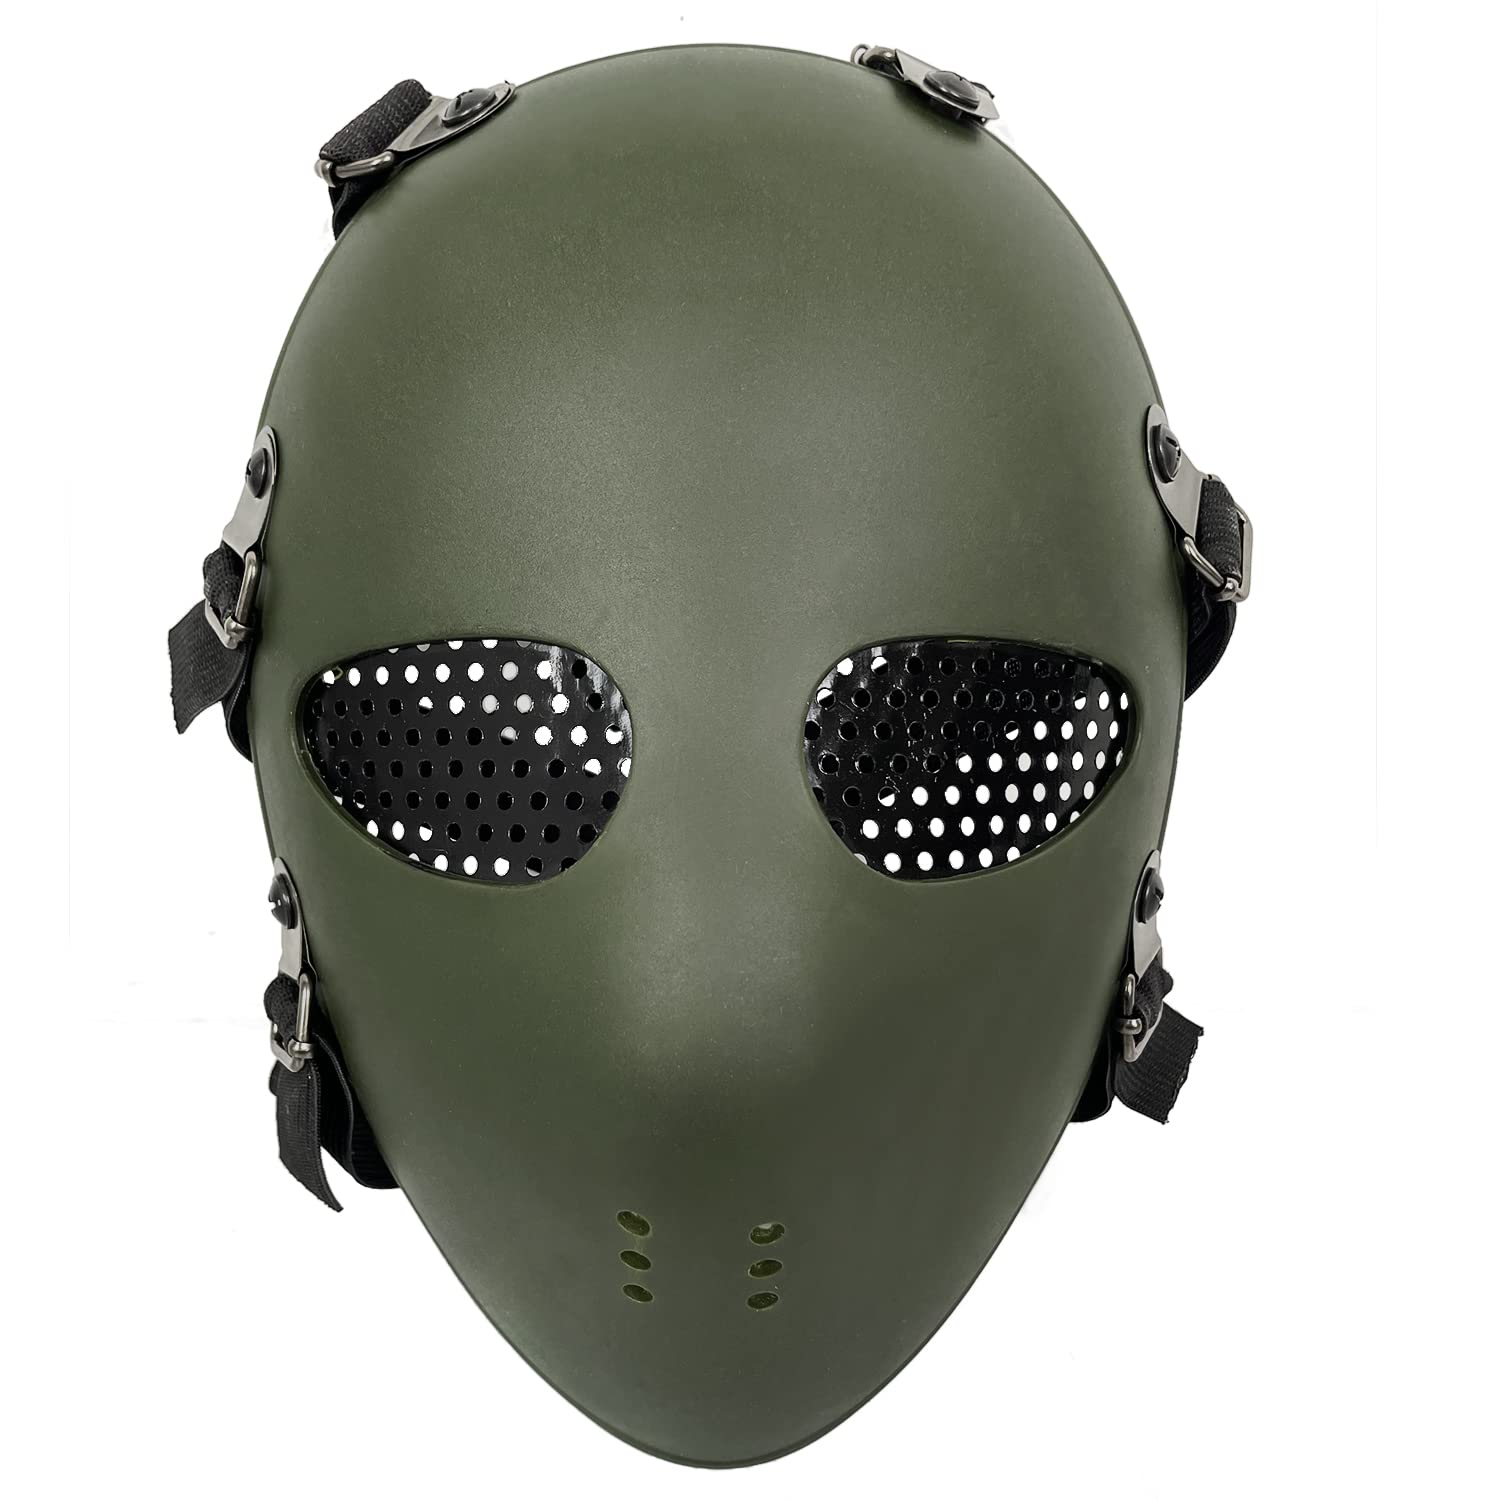 Ballistic Face Mask Threat Level 3A for FAST MICH